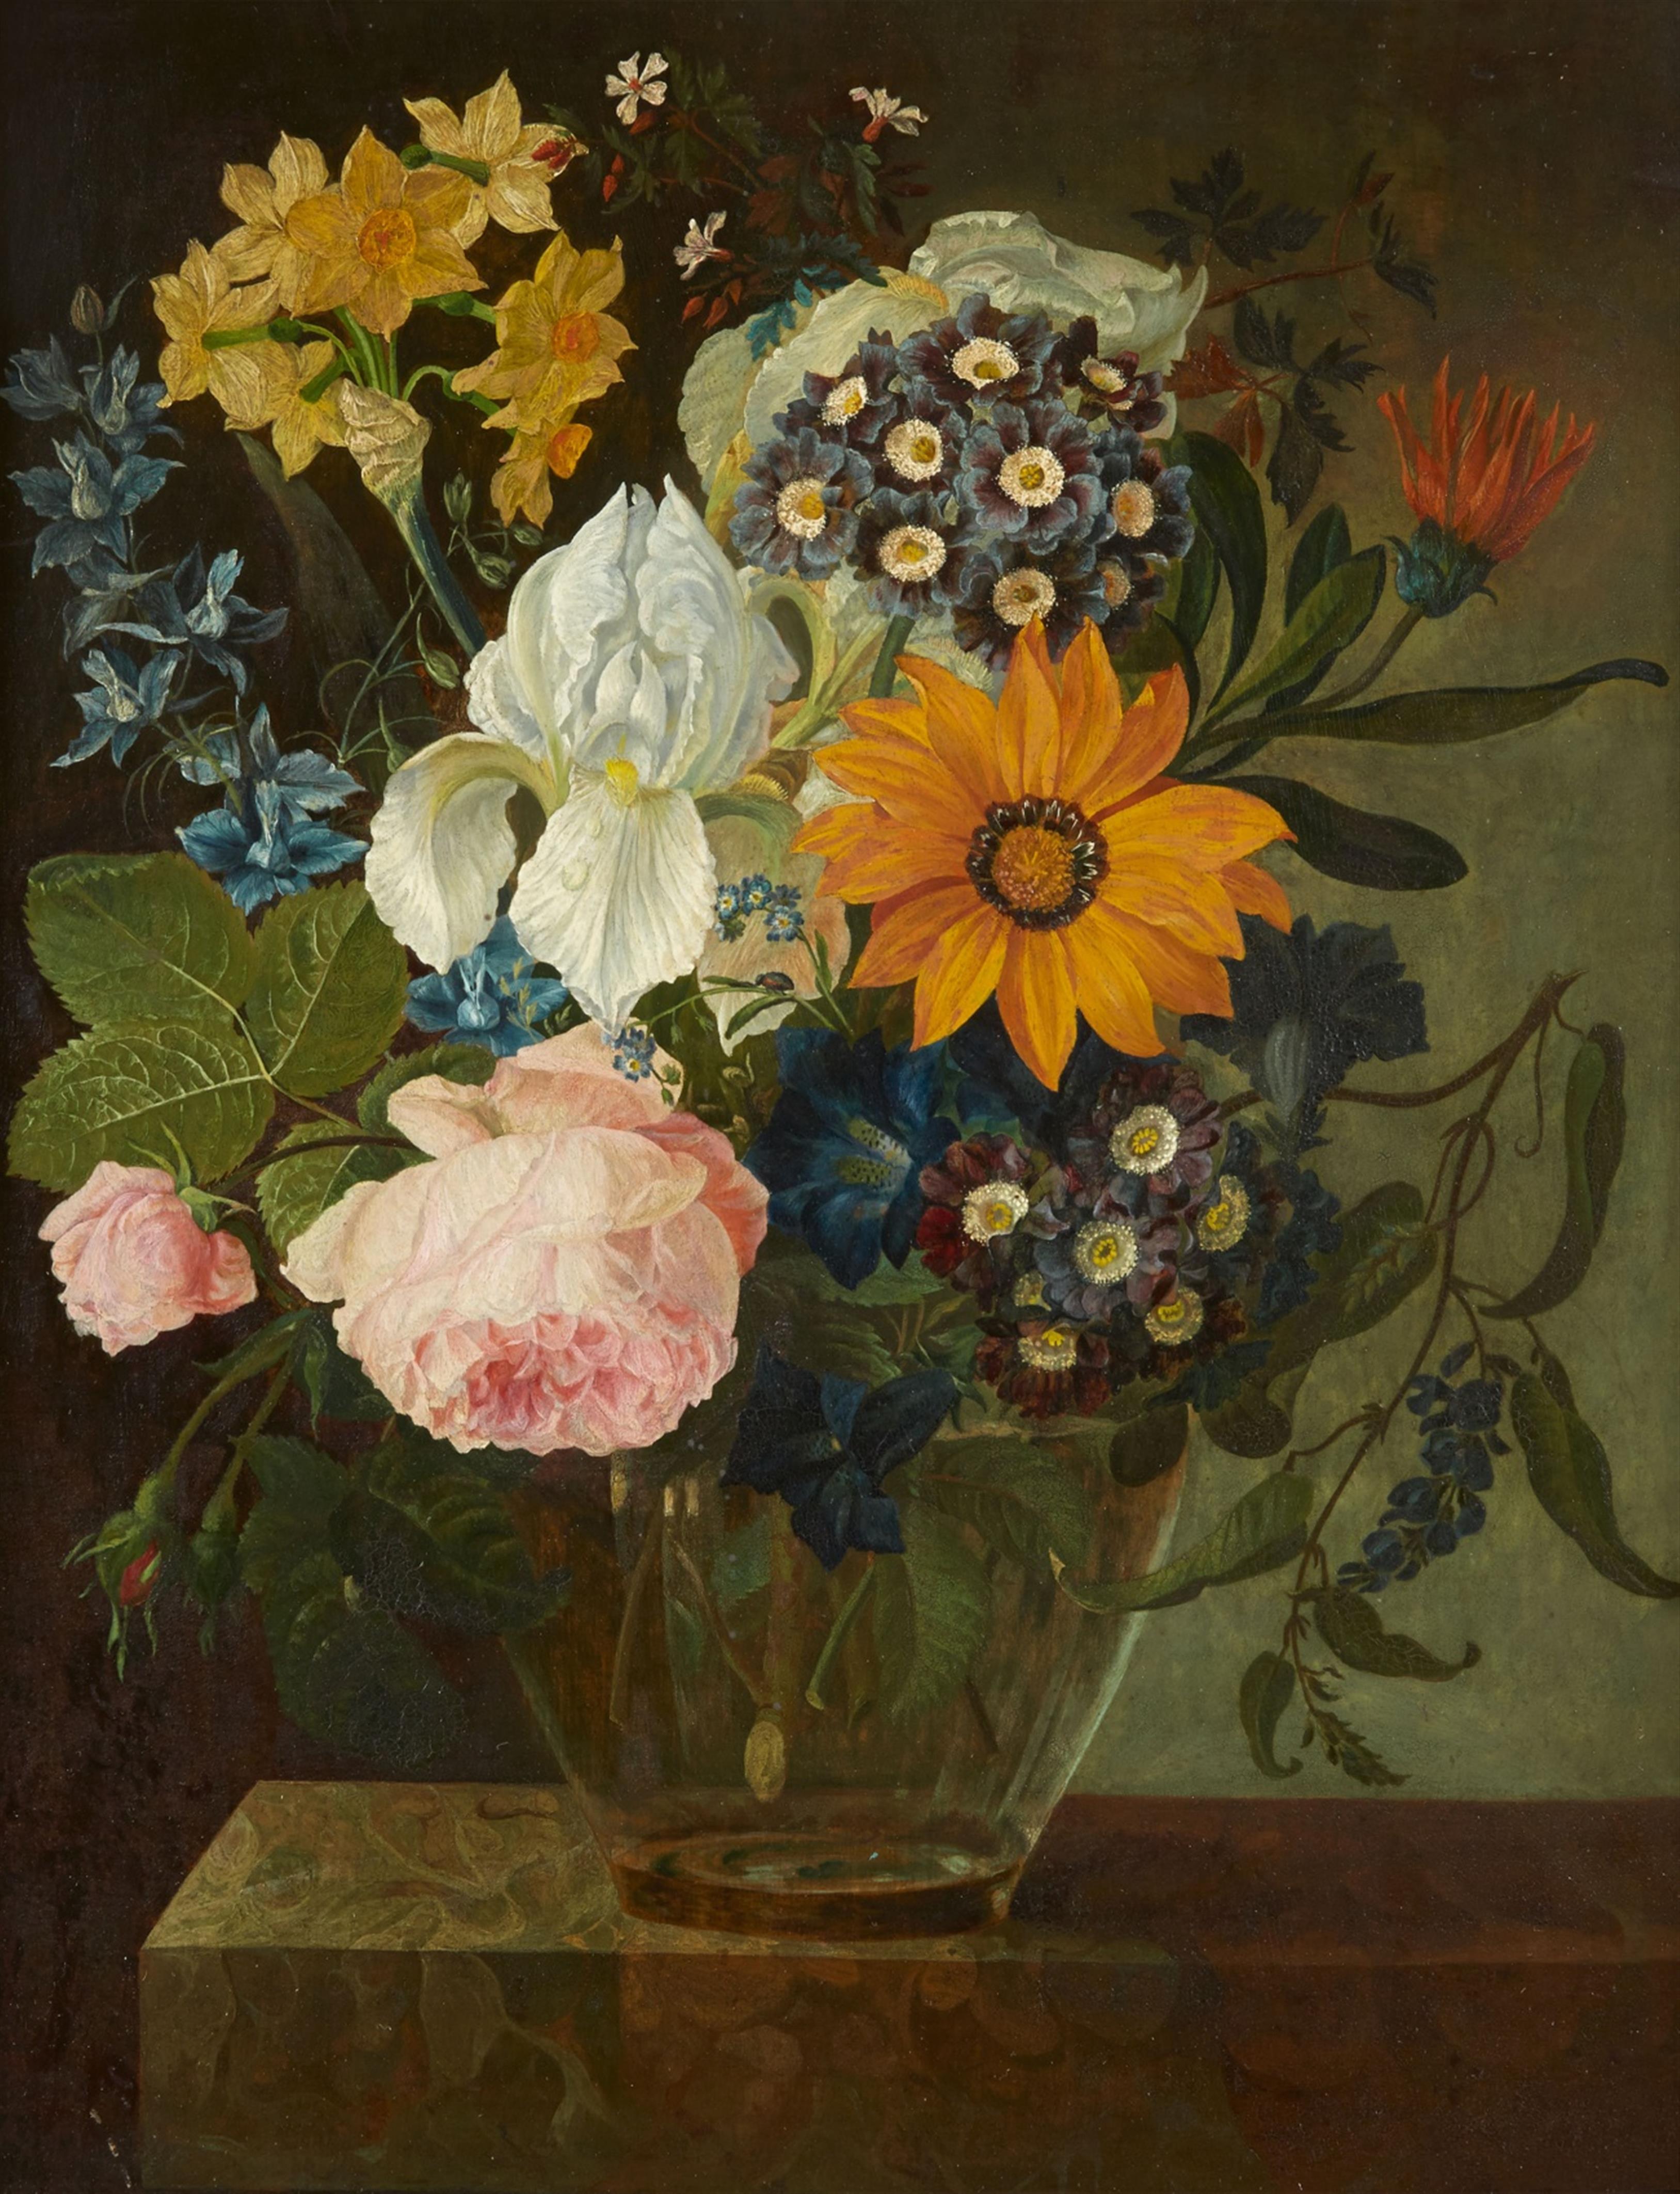 Unknown Artist 19th century - Floral Still Life in a Glass Vase - image-1